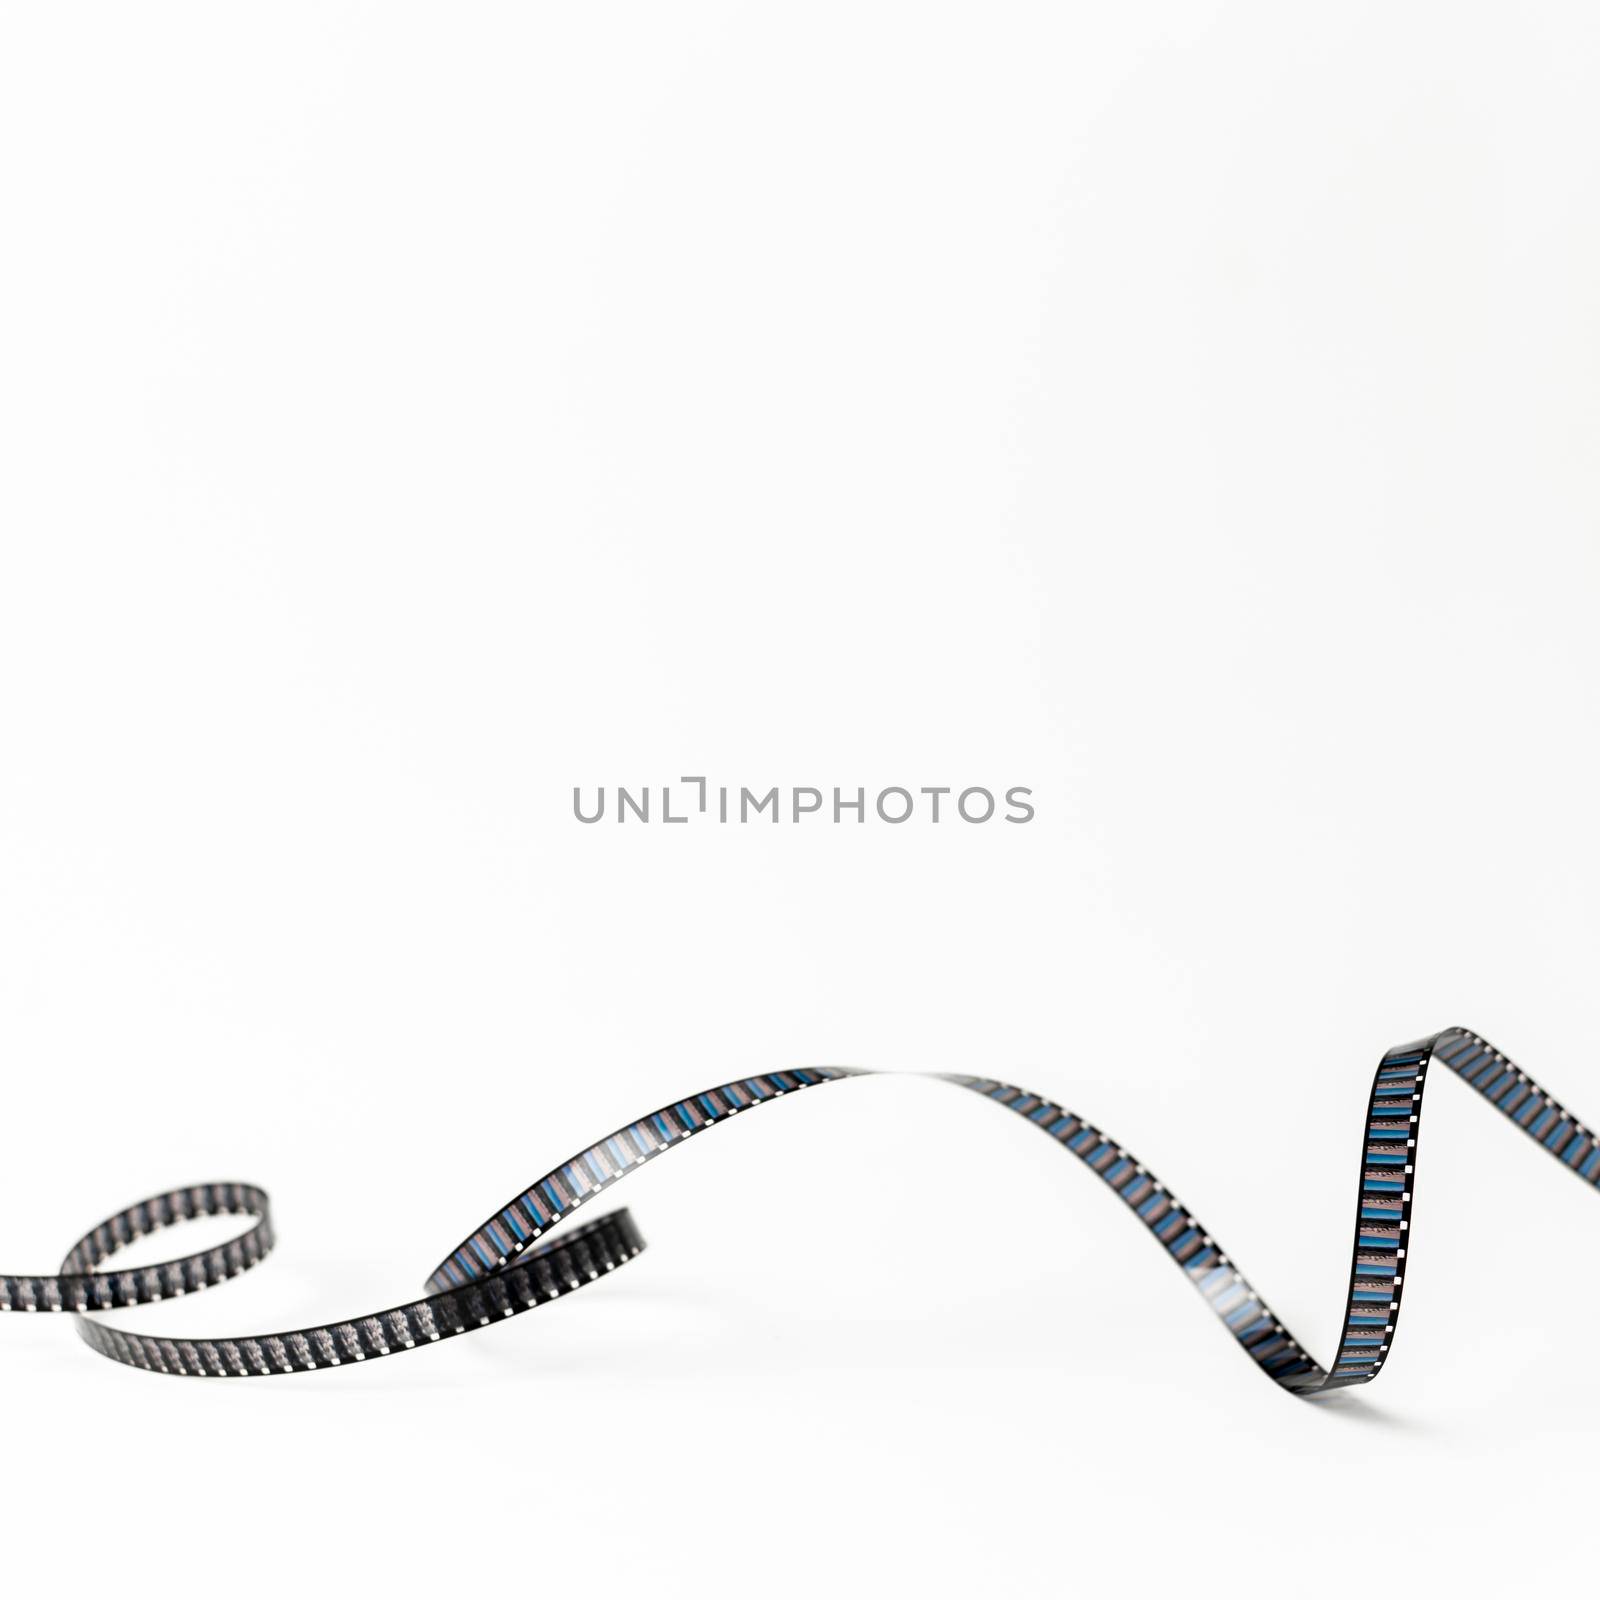 curled film stripes isolated white background by Zahard